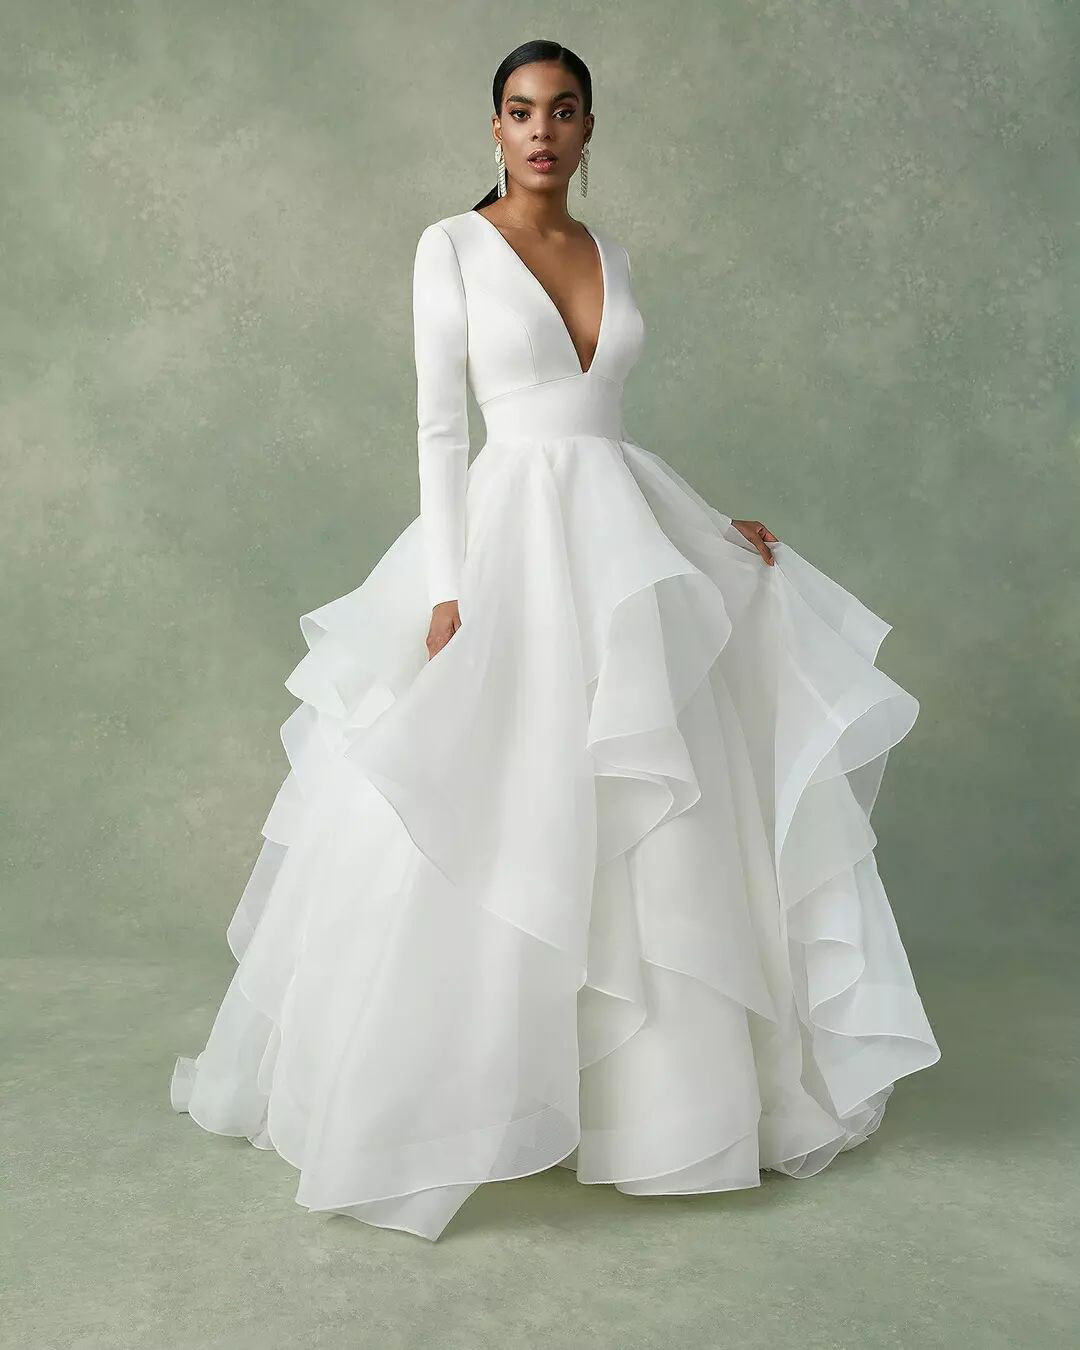 best wedding dresses ball gown with long sleeves ruffled skirt simple justin alexander